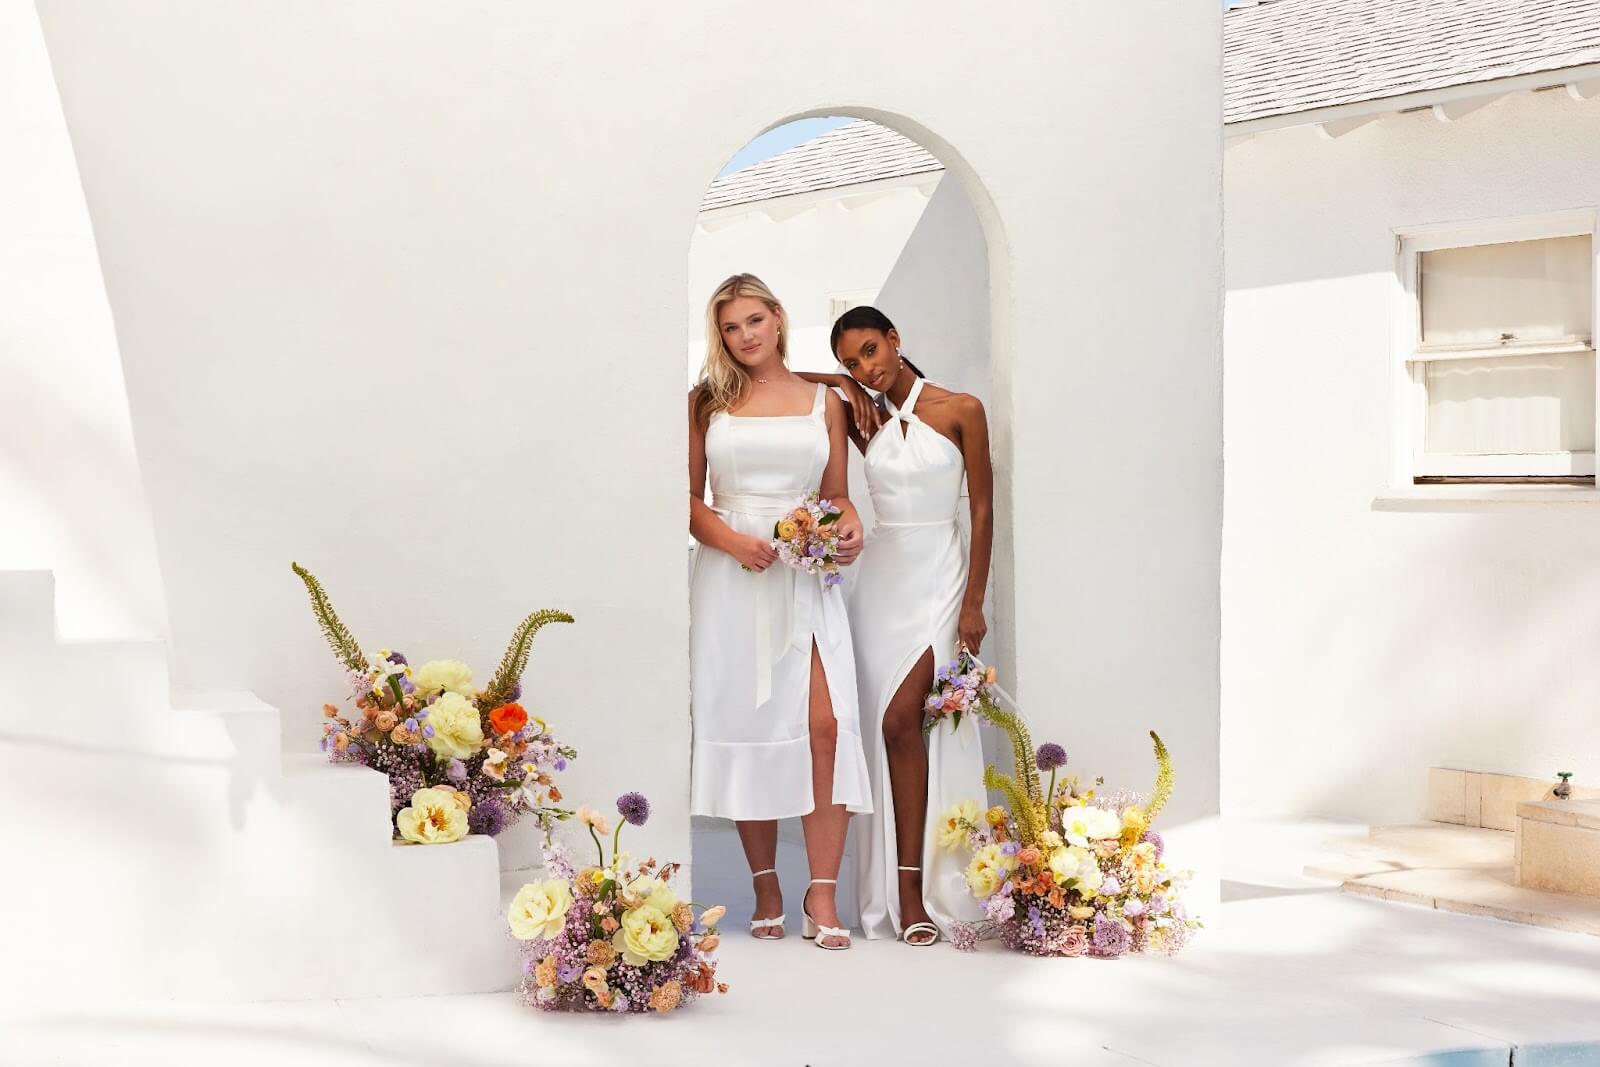 Honeymoon Dresses For Newly-Weds To Save Right Away